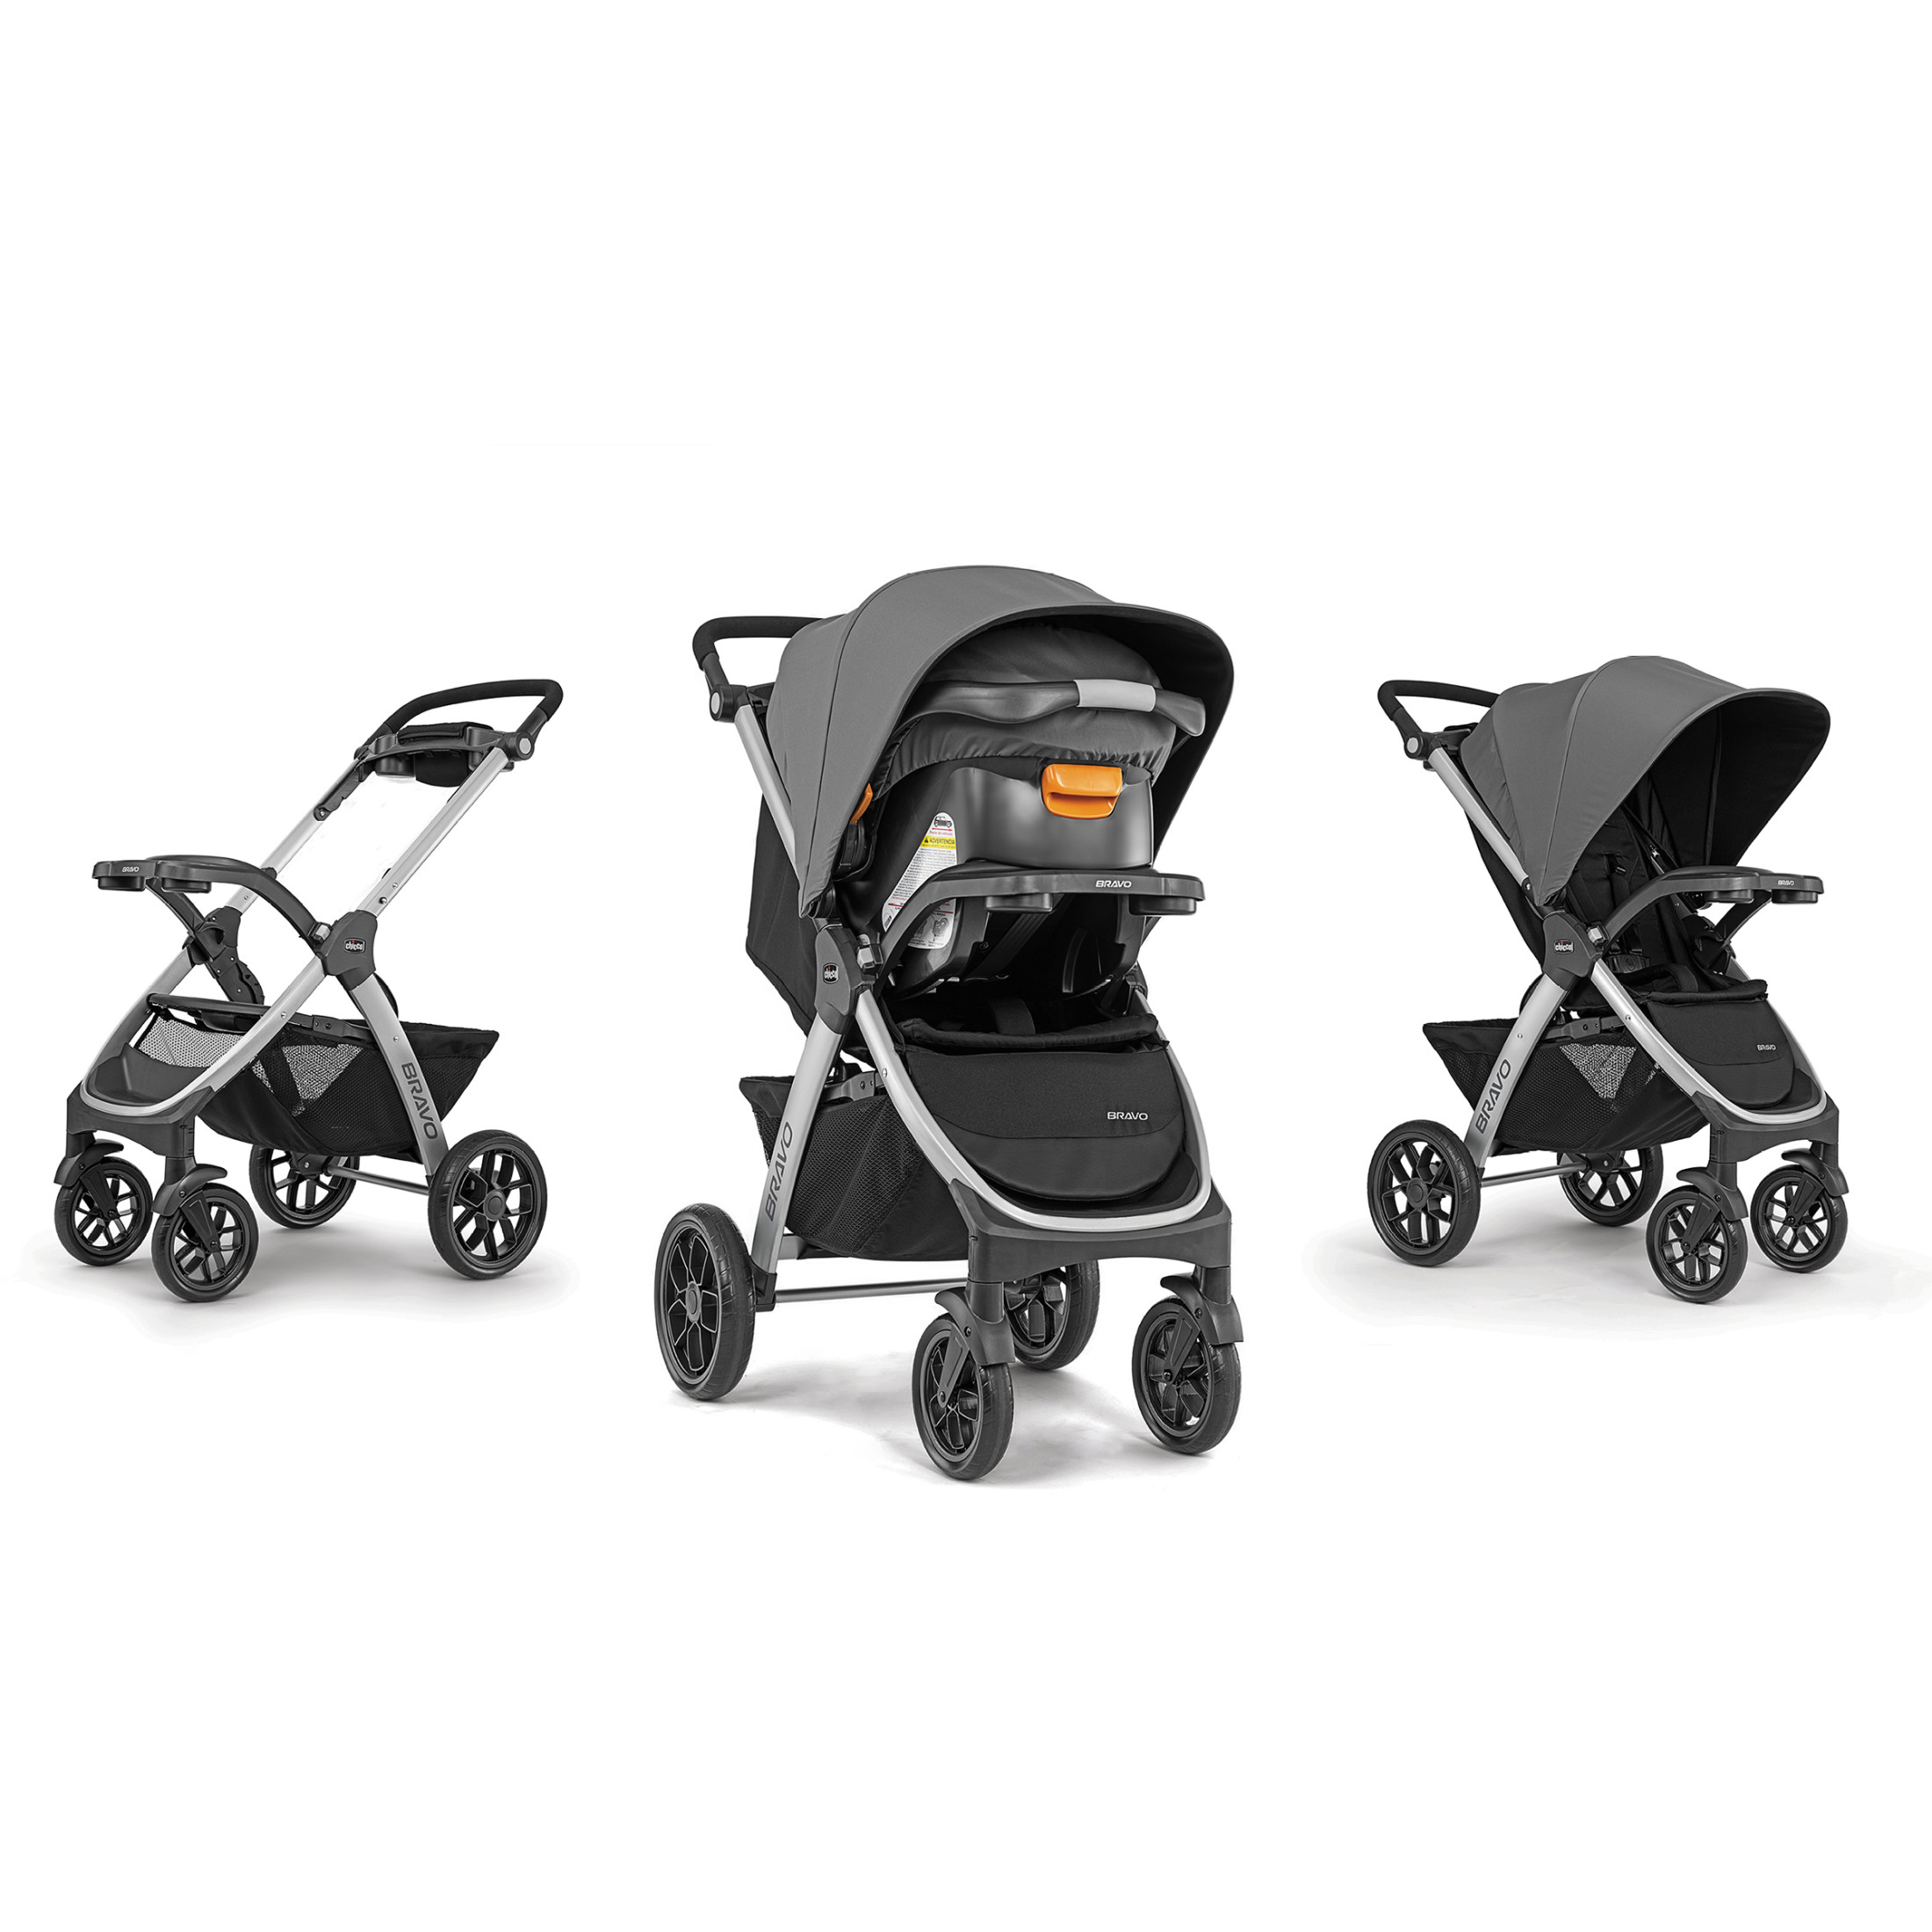 Chicco Bravo Trio Travel System Stroller with KeyFit 30 Infant Car Seat - Brooklyn (Navy) - image 2 of 14